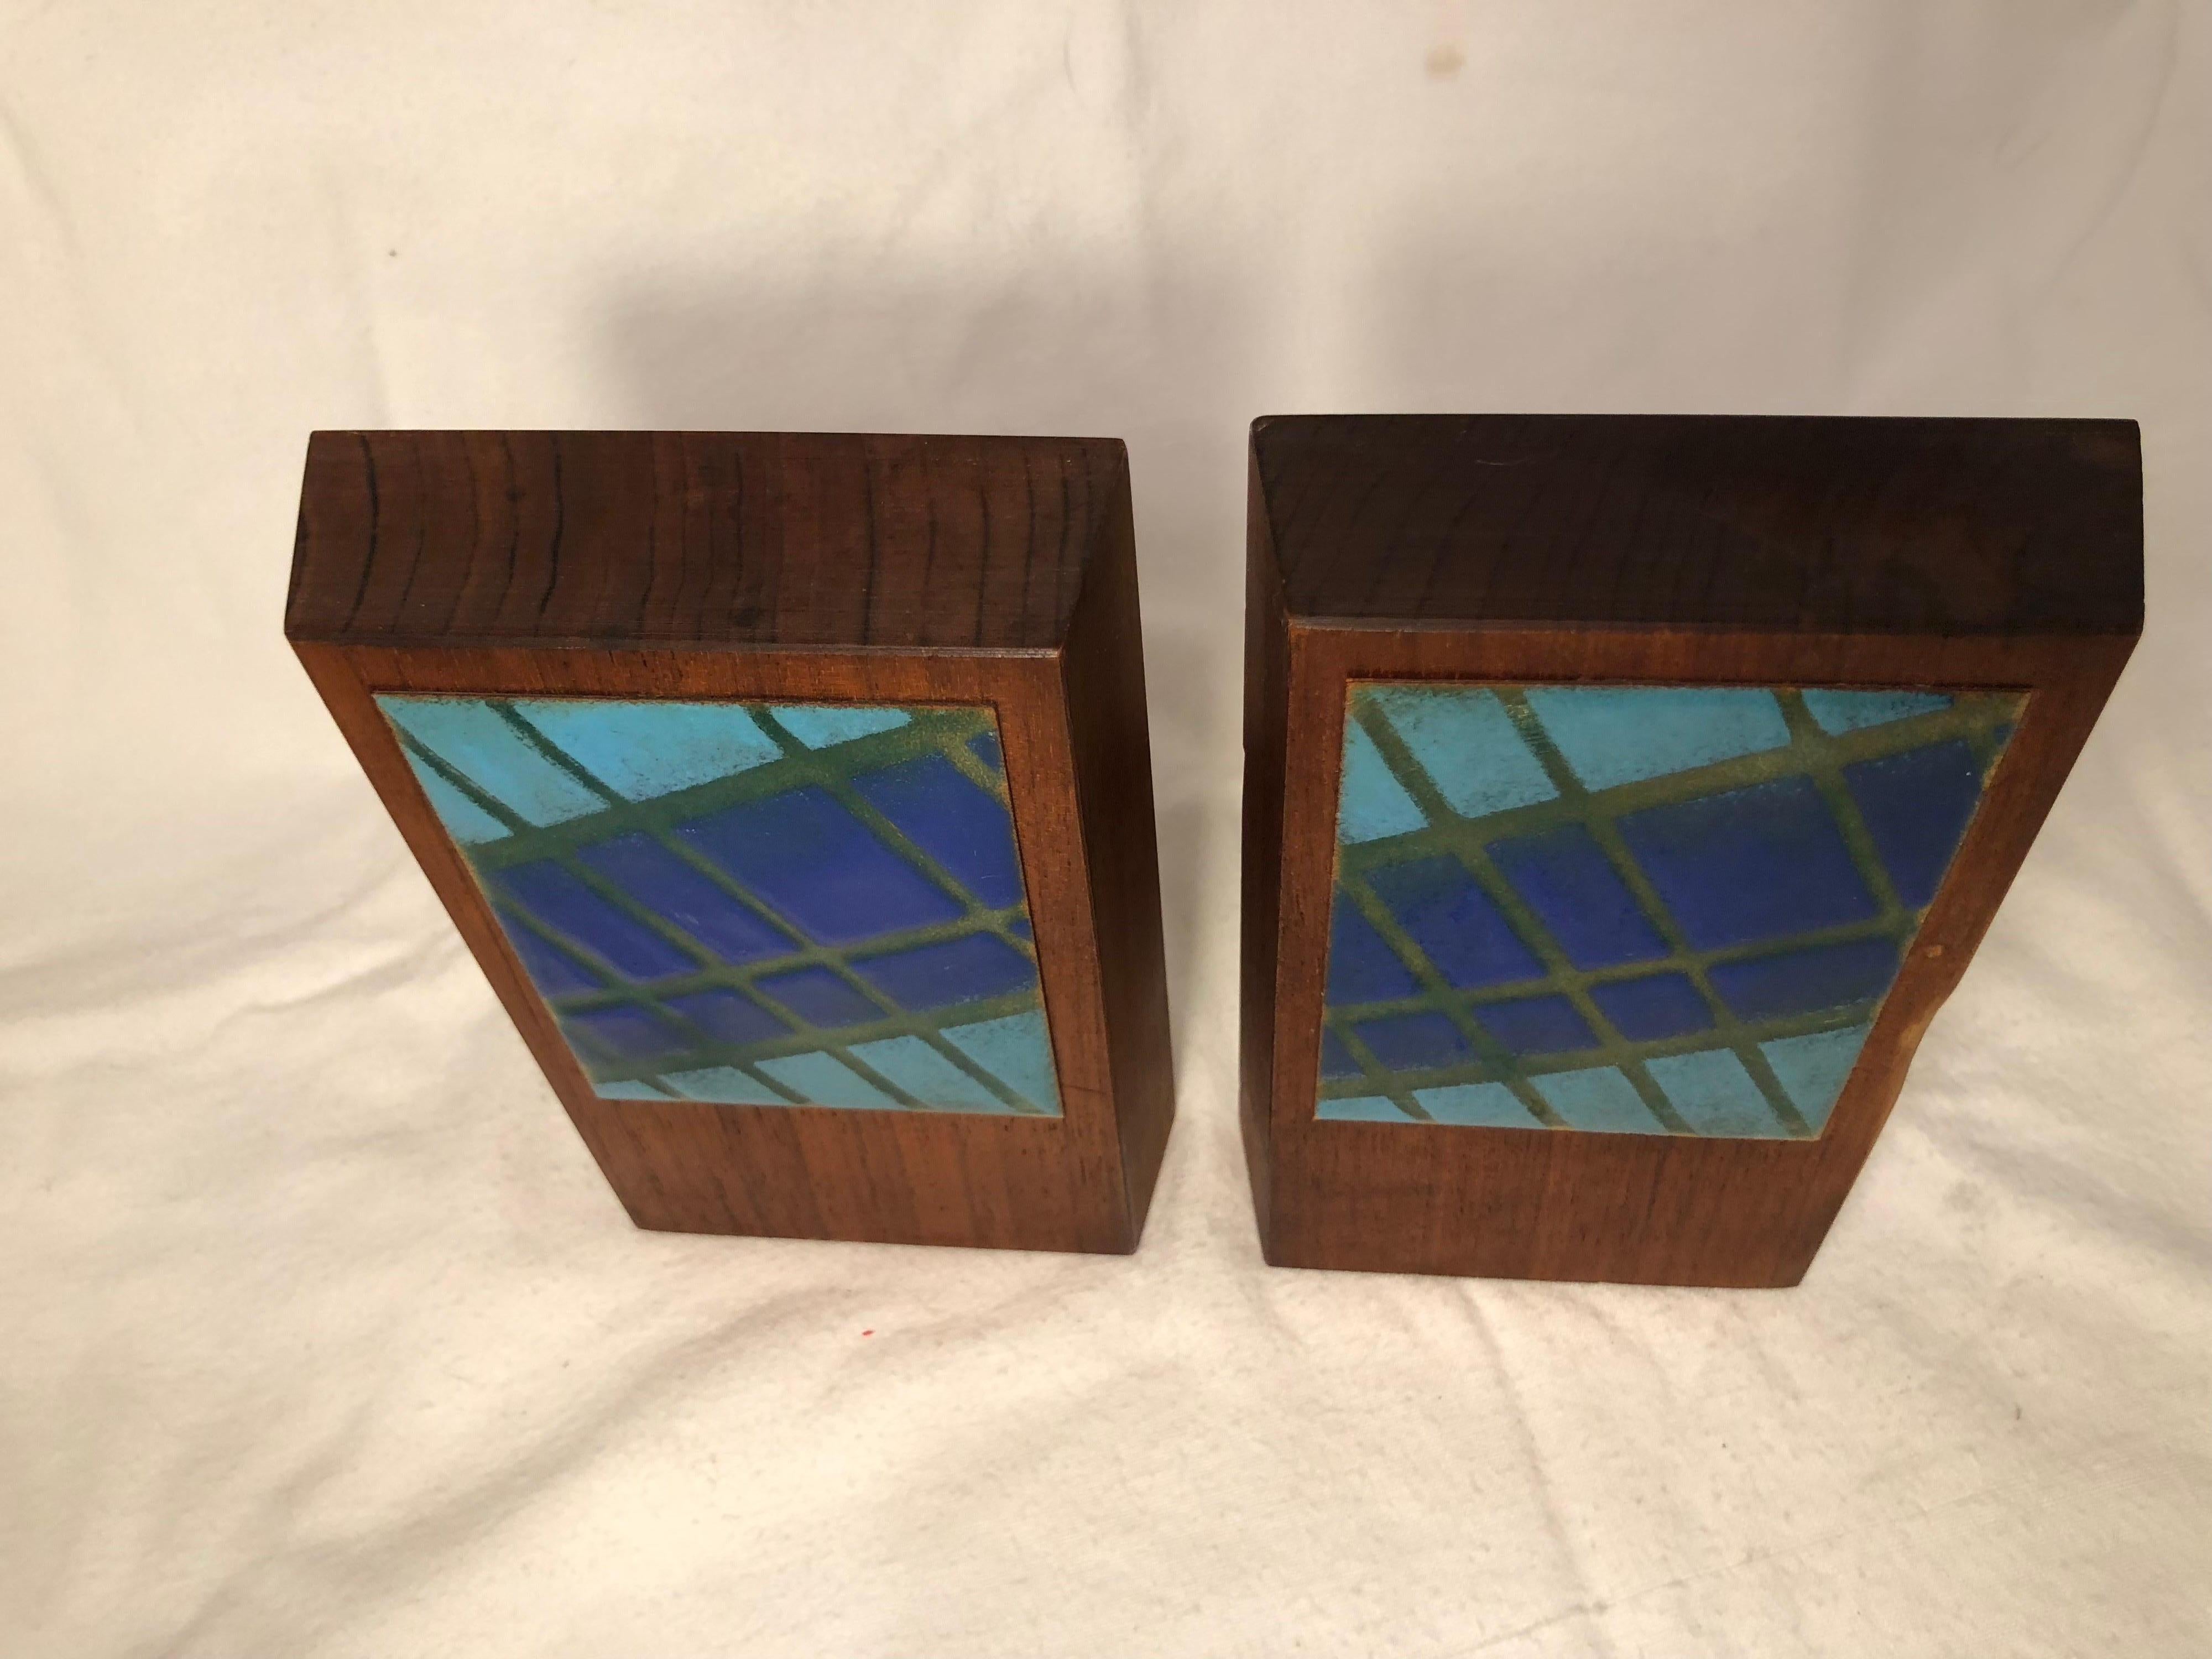 Pair of Mid-Century Modern walnut and enamel bookends. Signed by Ernest John.
The perfect accessory to a mid century office. Colorful and vibrant. These can parcel ship for $29 domestically